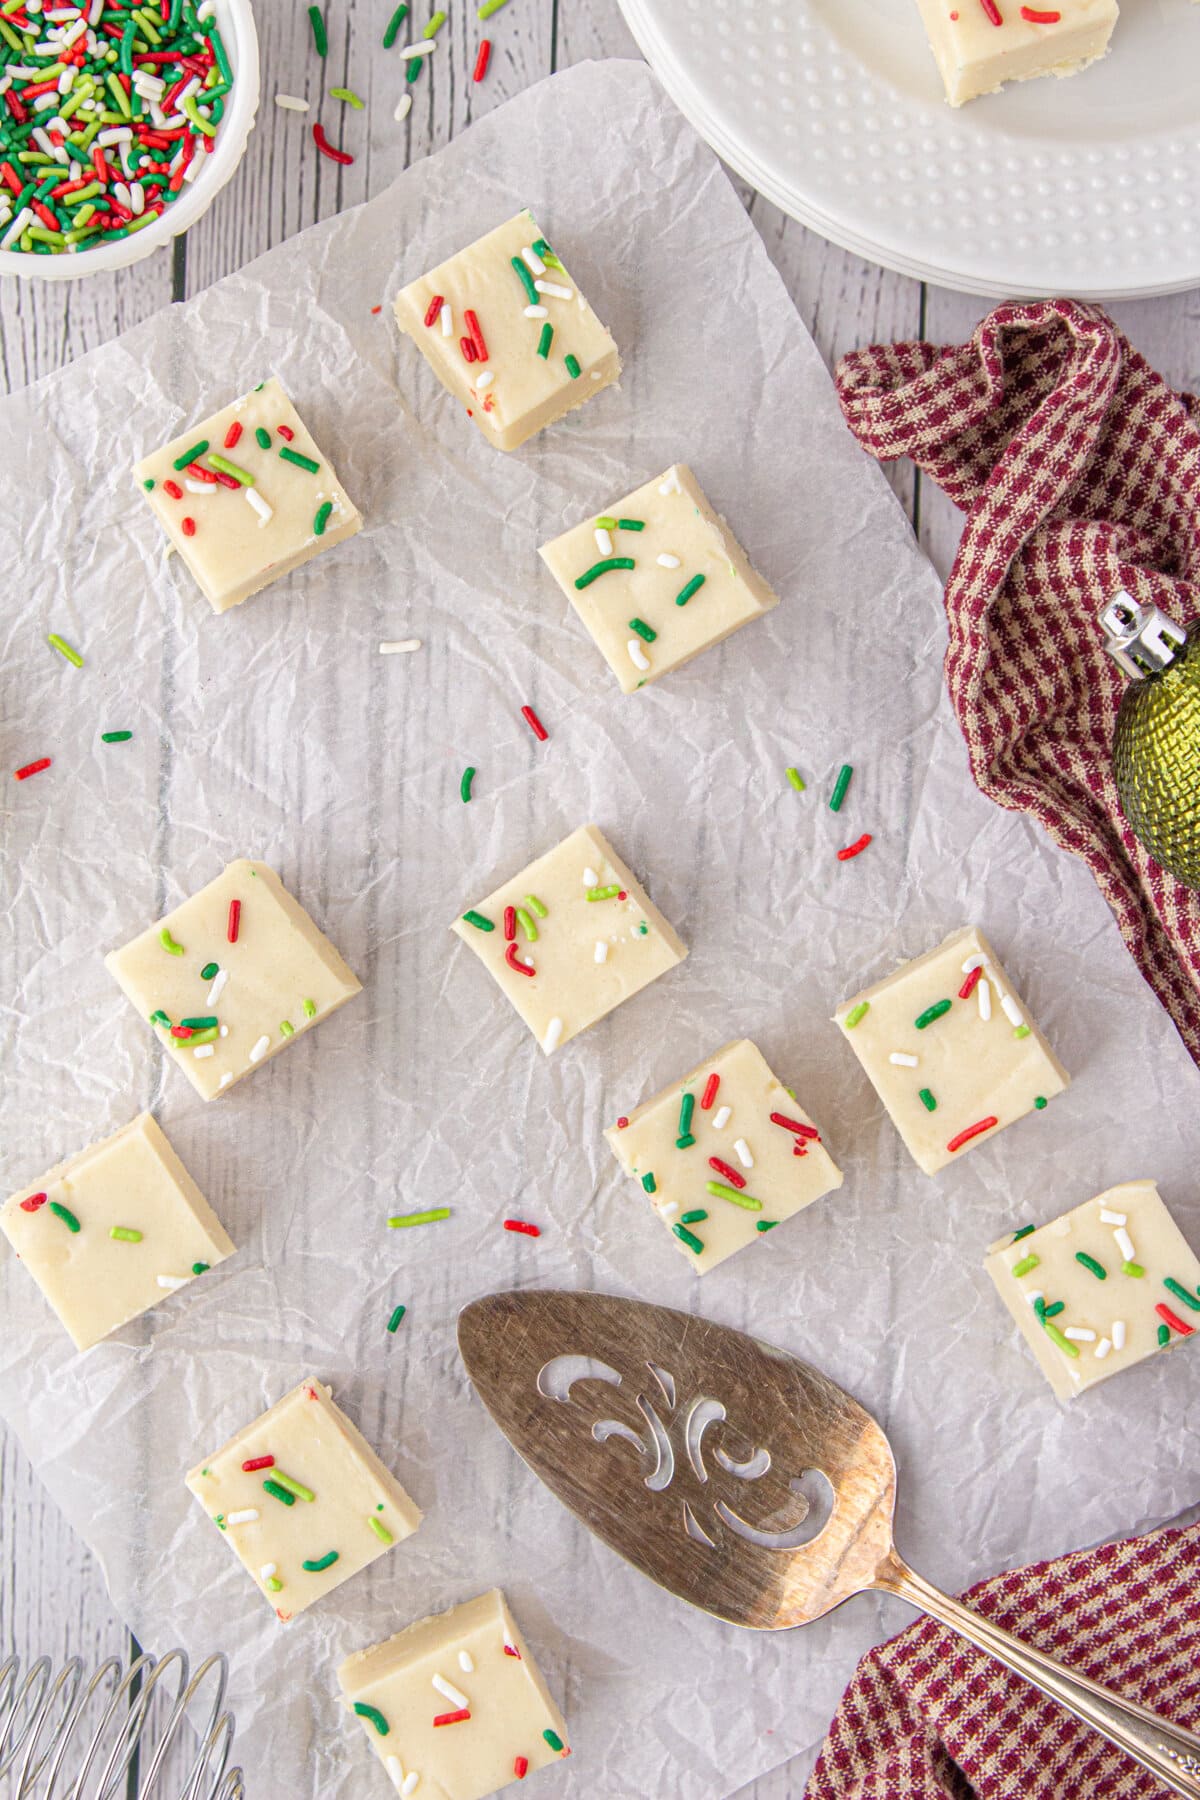 Pieces of white fudge are topped with Christmas-colored sprinkles and set on a piece of parchment paper.